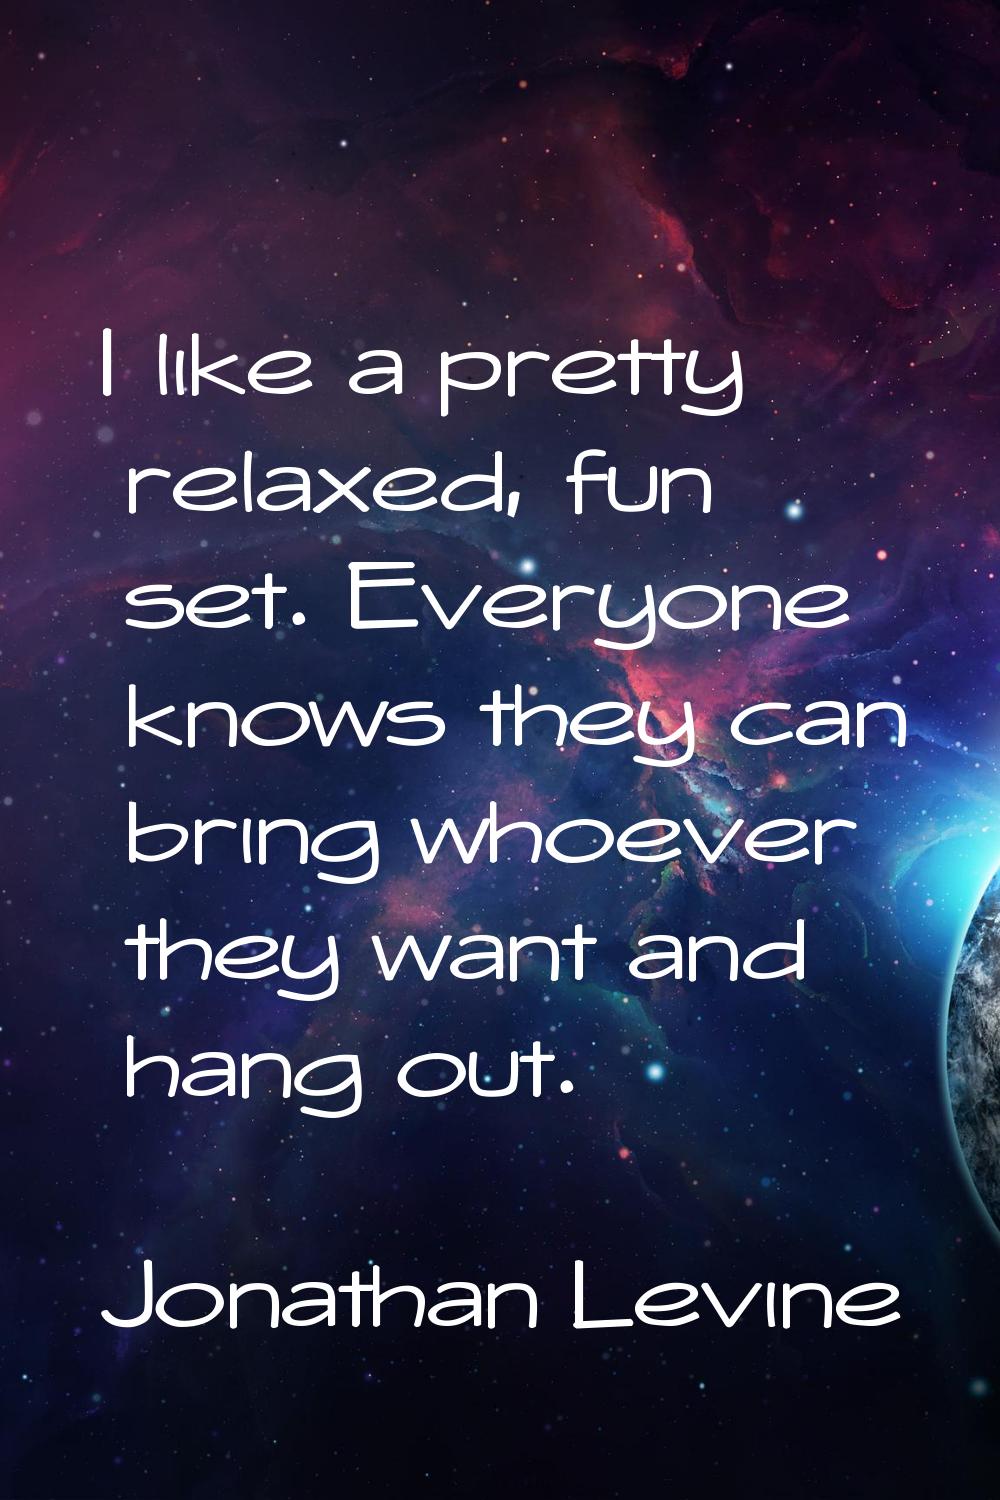 I like a pretty relaxed, fun set. Everyone knows they can bring whoever they want and hang out.